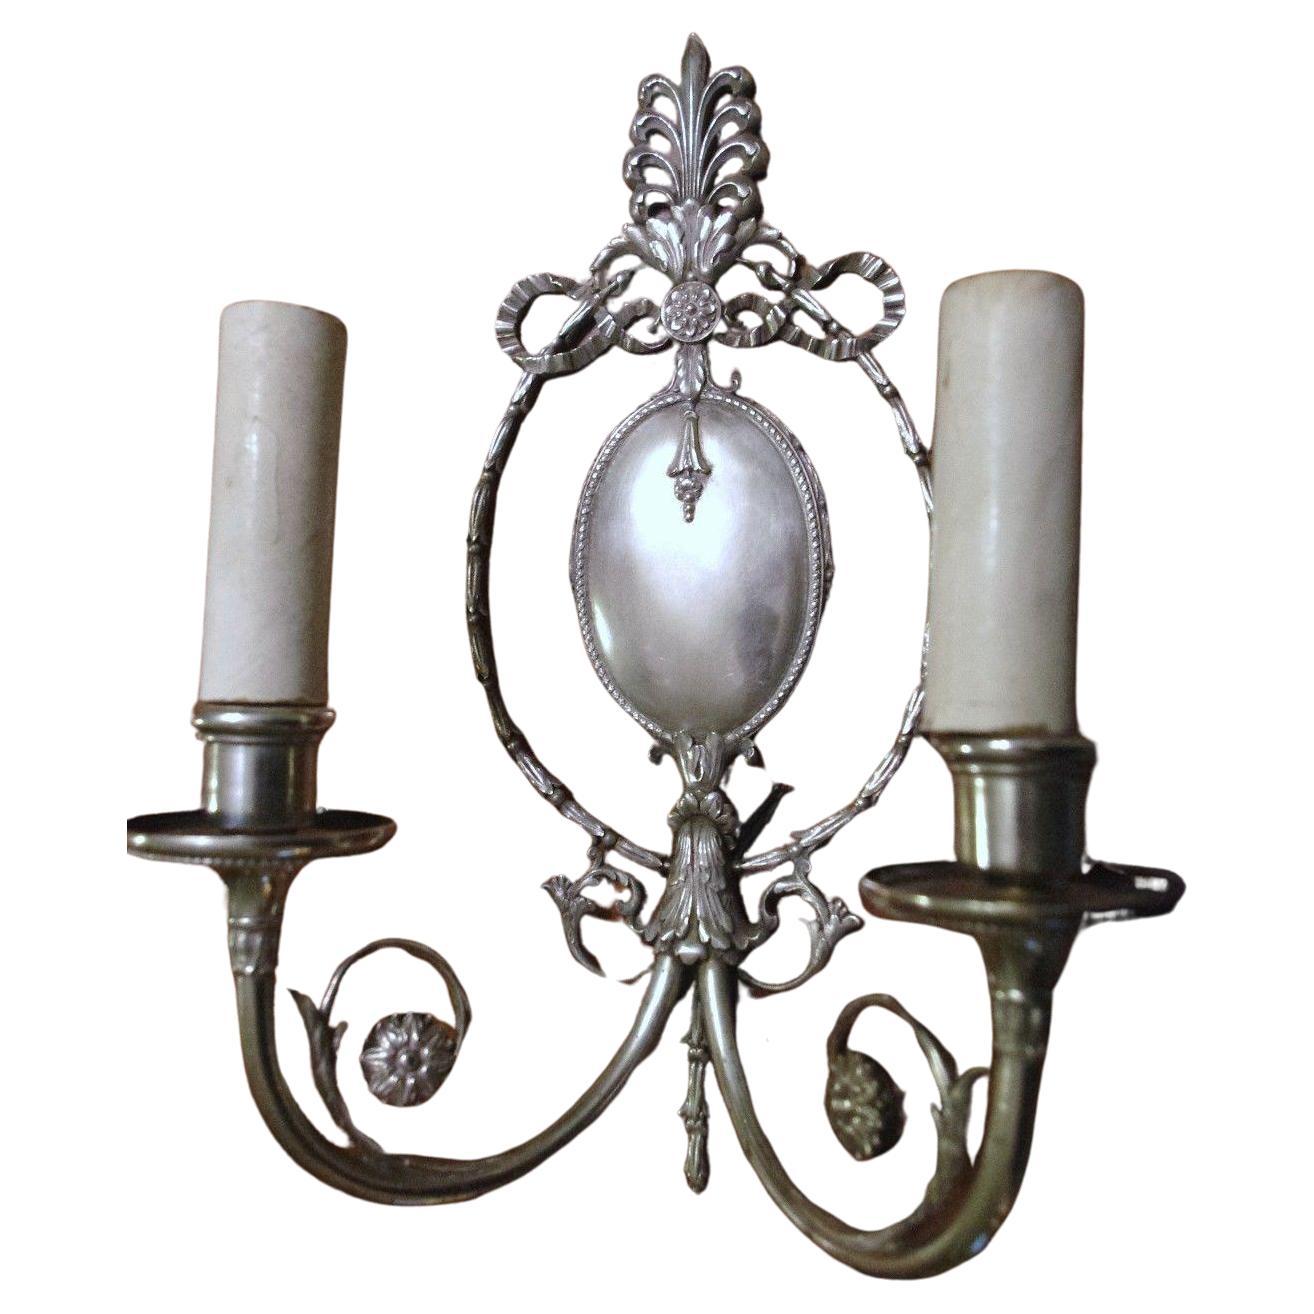 Pair of Documented c1913 Bronze/ Silverplate Neoclassical Wall Sconces by E.F. Caldwell. Please look closely at the pictures the detail is amazing! I purchased these directly from an Antique Dealer who specializes in E.F. Caldwell lighting. These